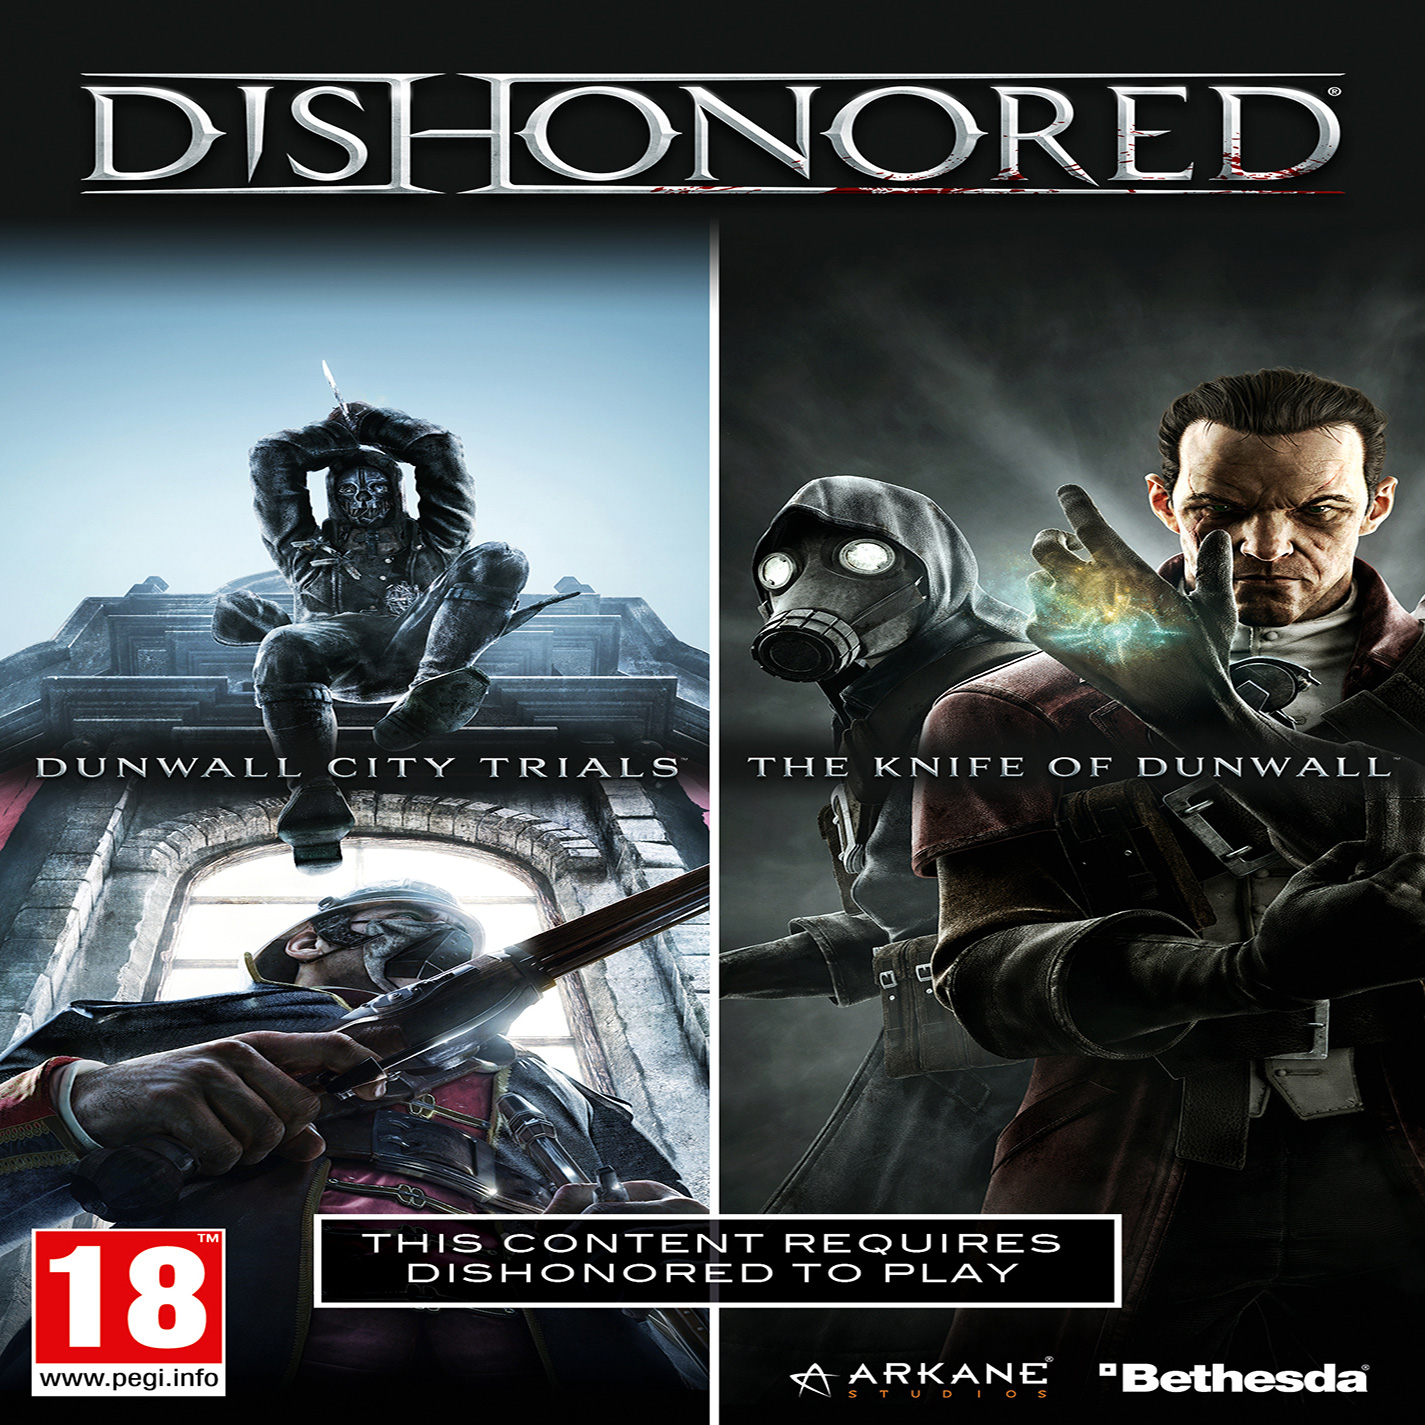 Dishonored: Dunwall City Trials & The Knife of Dunwall - pedn CD obal